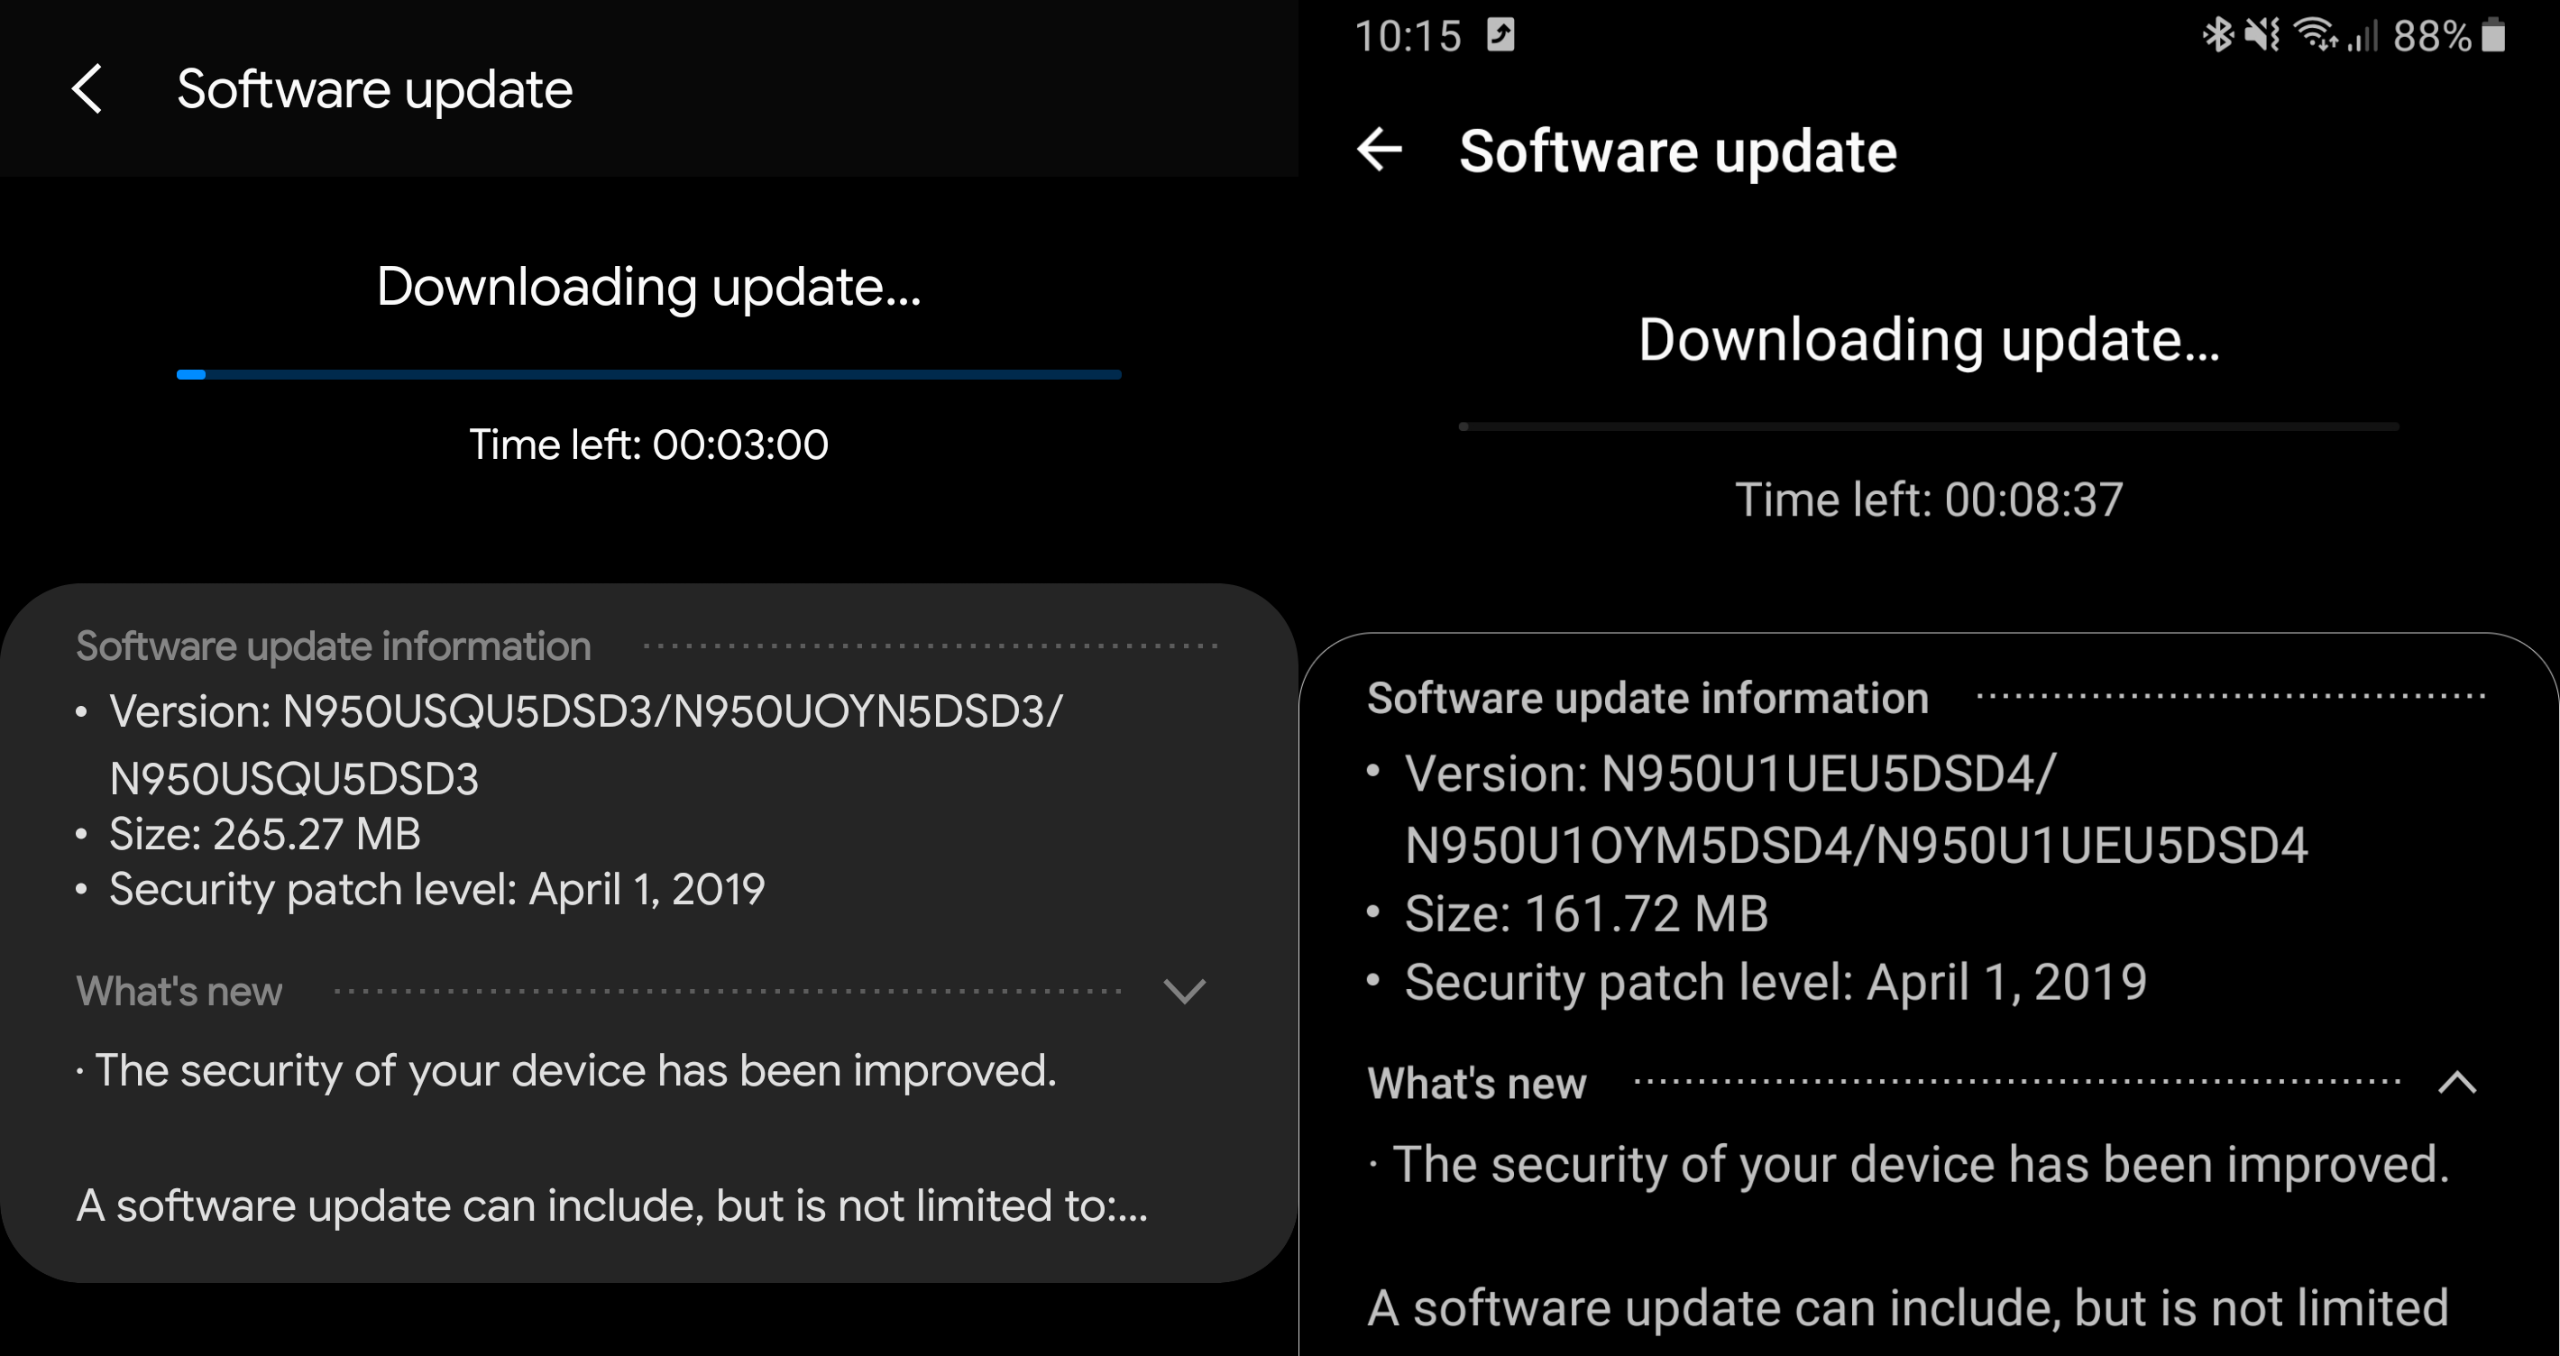 Samsung Galaxy Note 8 April patch